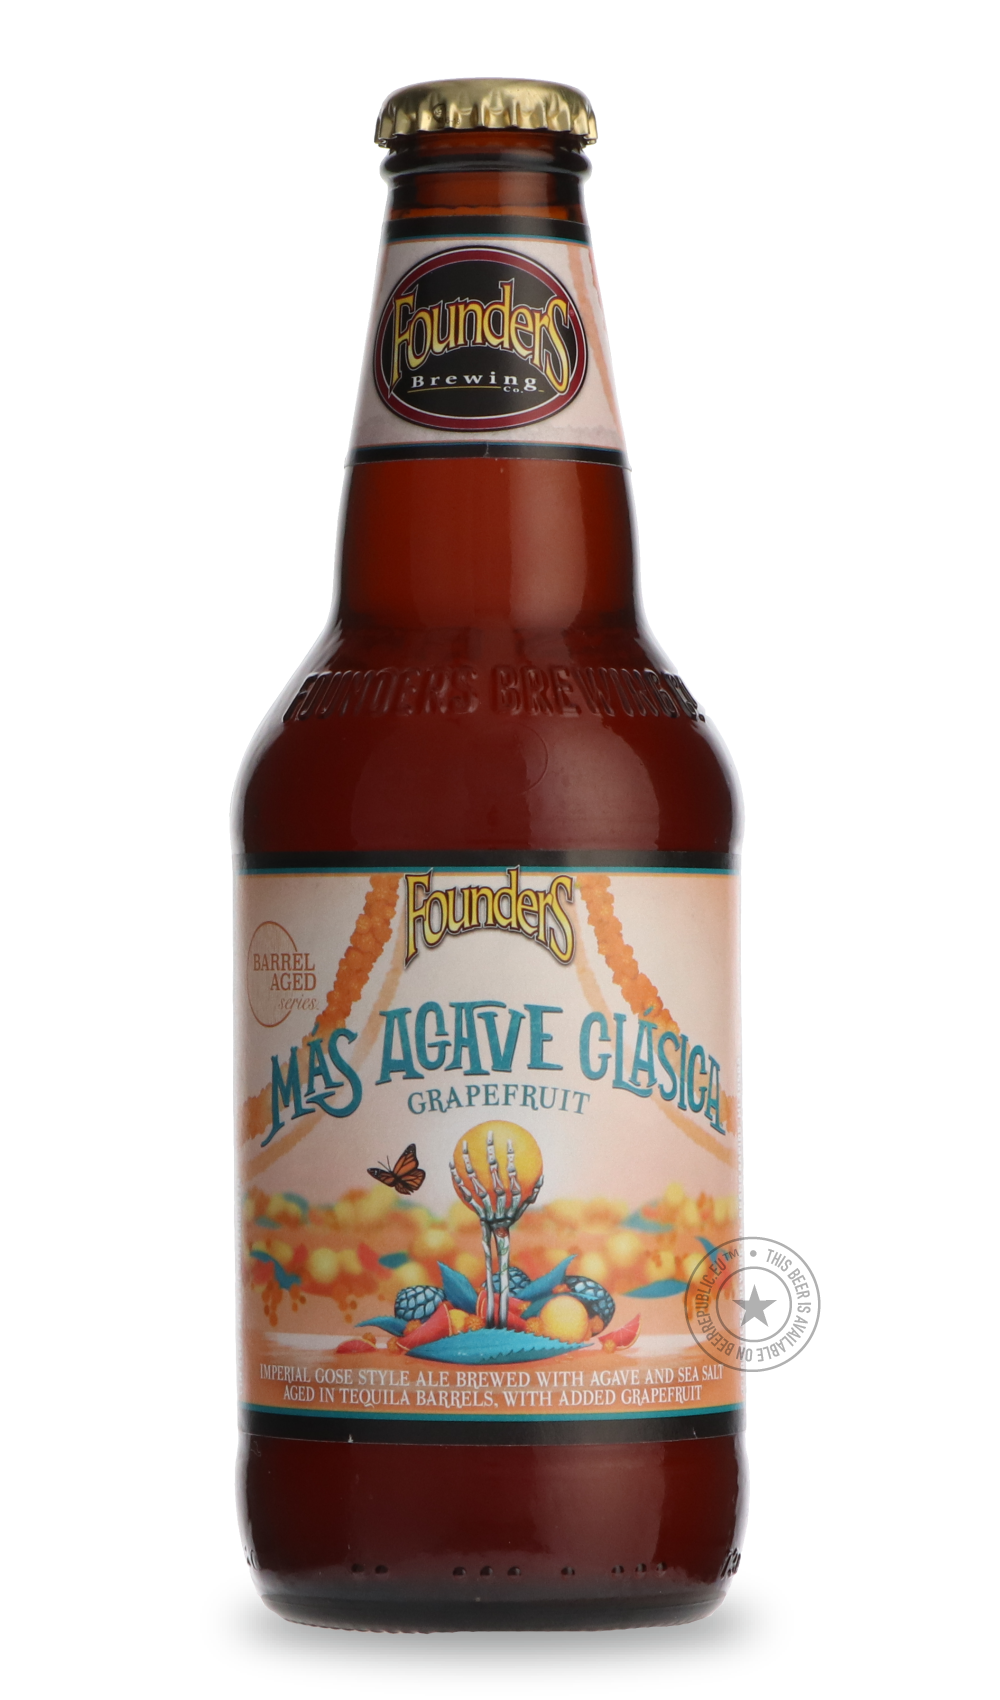 -Founders- Más Agave Grapefruit-Sour / Wild & Fruity- Only @ Beer Republic - The best online beer store for American & Canadian craft beer - Buy beer online from the USA and Canada - Bier online kopen - Amerikaans bier kopen - Craft beer store - Craft beer kopen - Amerikanisch bier kaufen - Bier online kaufen - Acheter biere online - IPA - Stout - Porter - New England IPA - Hazy IPA - Imperial Stout - Barrel Aged - Barrel Aged Imperial Stout - Brown - Dark beer - Blond - Blonde - Pilsner - Lager - Wheat - W